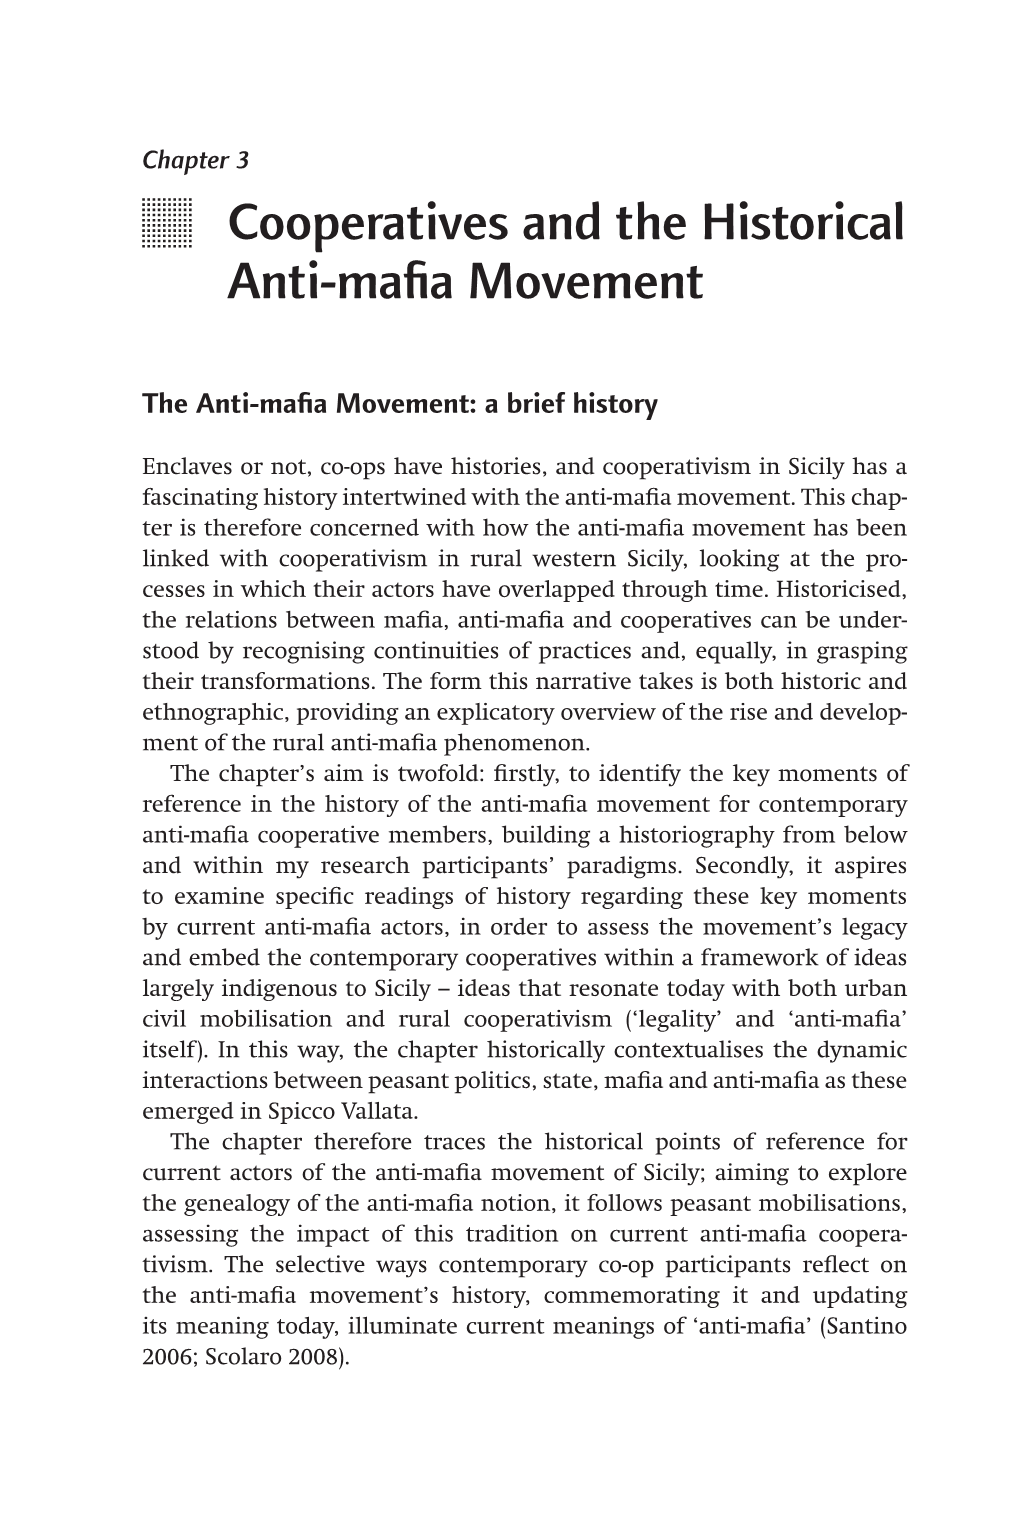 Chapter 3. Cooperatives and the Historical Anti-Mafia Movement